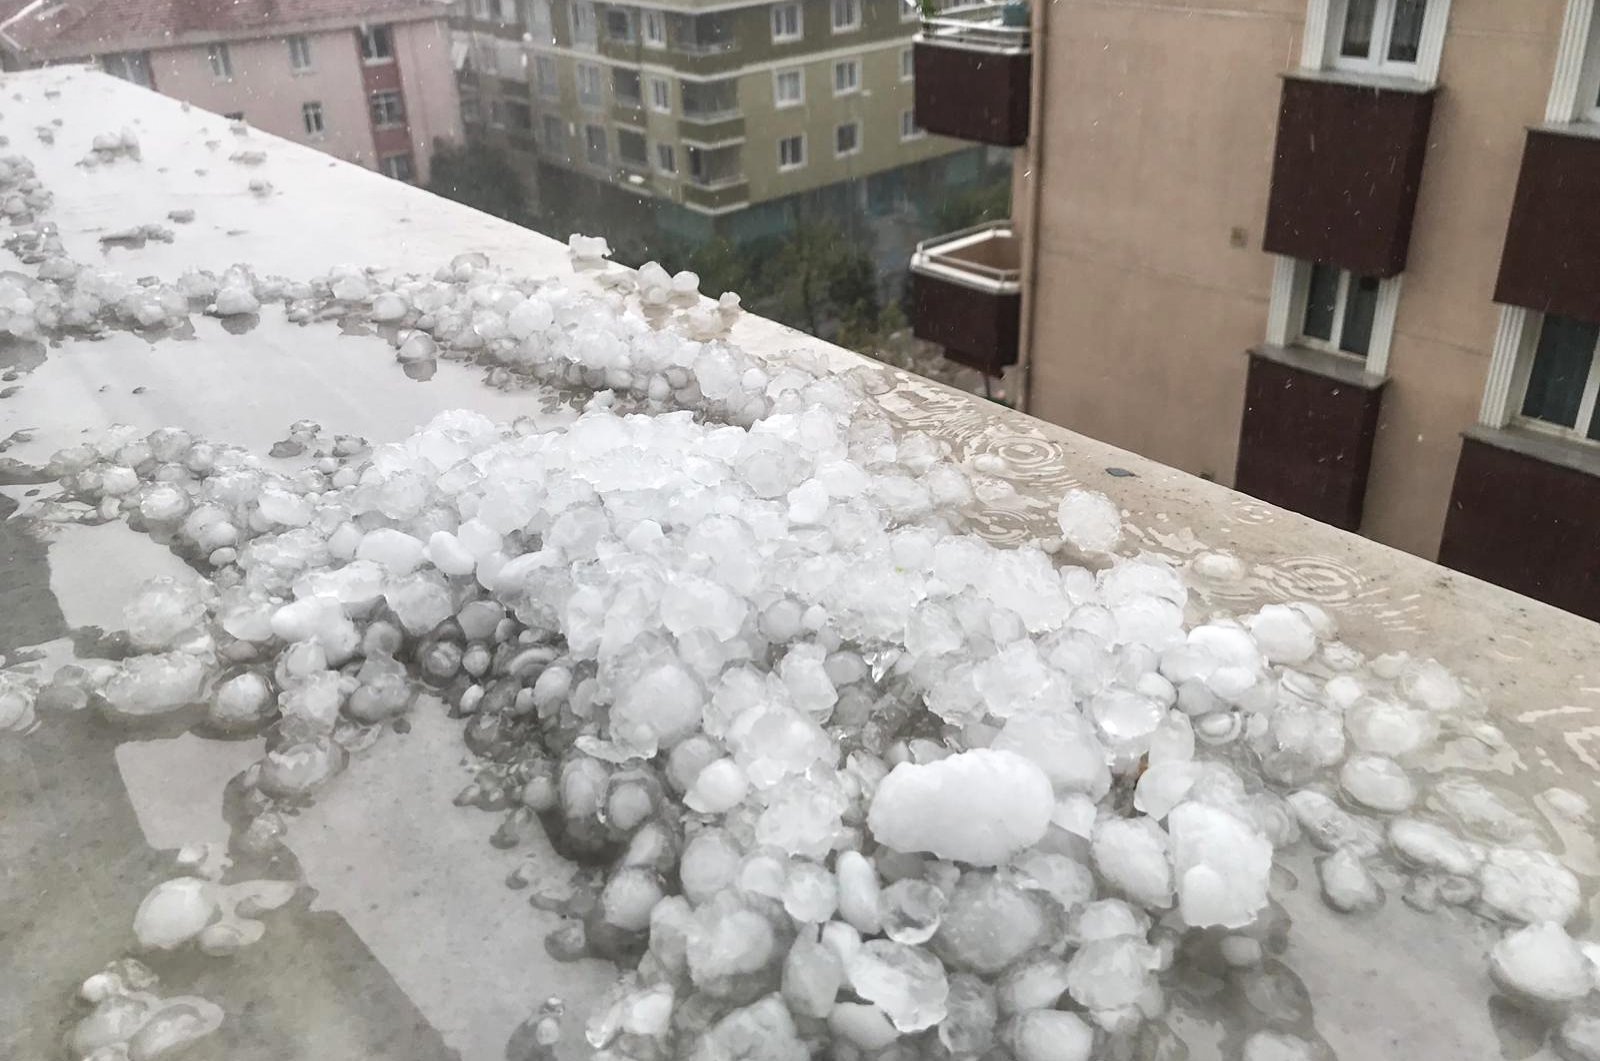 A cluster of hail pellets atop the roof of a building in Üsküdar district, in Istanbul, Turkey, Sept. 29, 2020. (AA Photo)